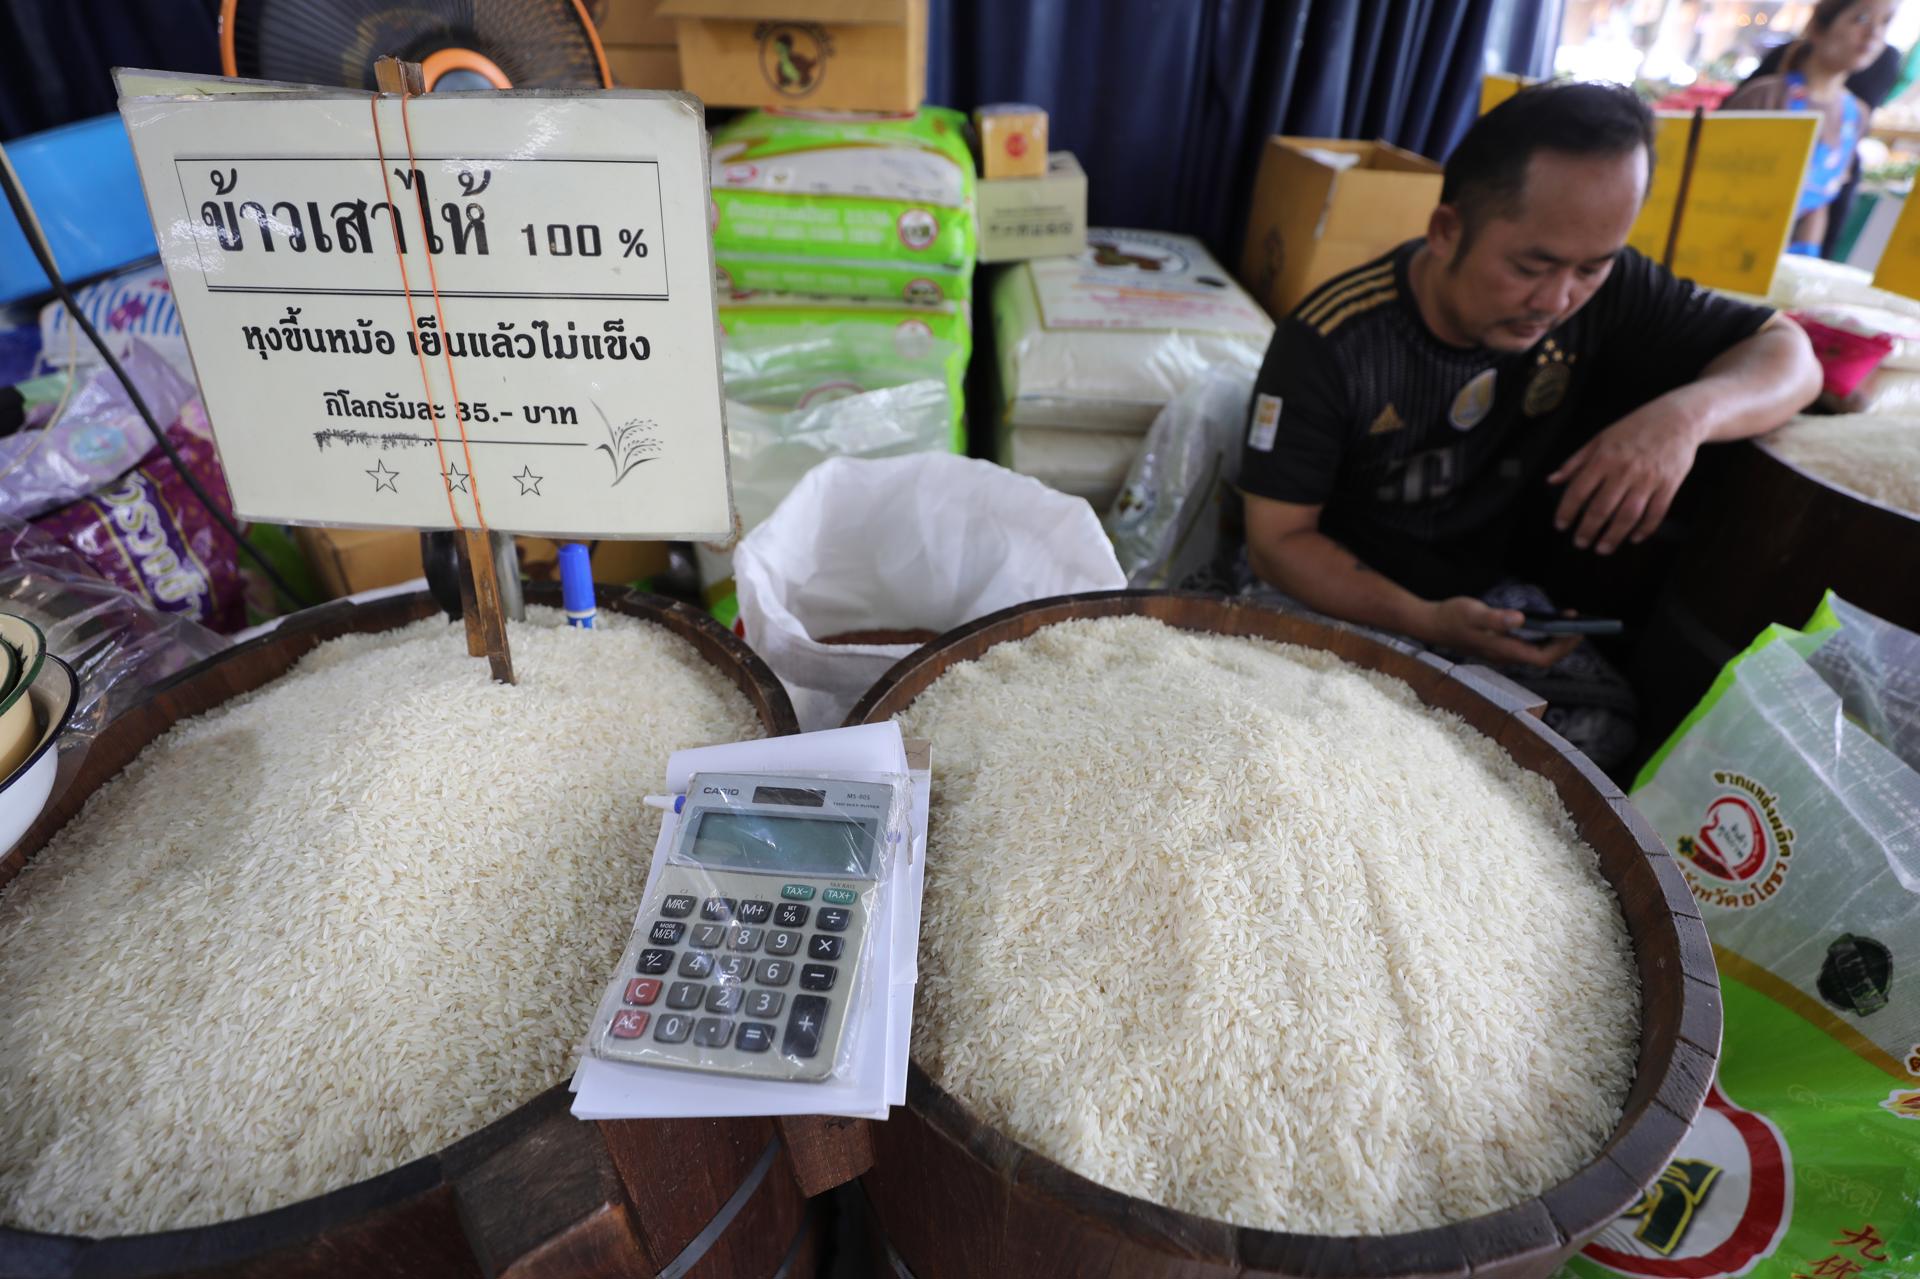 A rice shop worker awaits customers at a market in Bangkok, Thailand, 13 August 2023. The Thai Rice Exporters Association revealed that the price of Thai rice in exports shot up 100 US dollars per metric ton in a month, after India banned rice exports from 20 July 2023, to reduce domestic rice prices and increase supply. EFE/EPA/NARONG SANGNAK